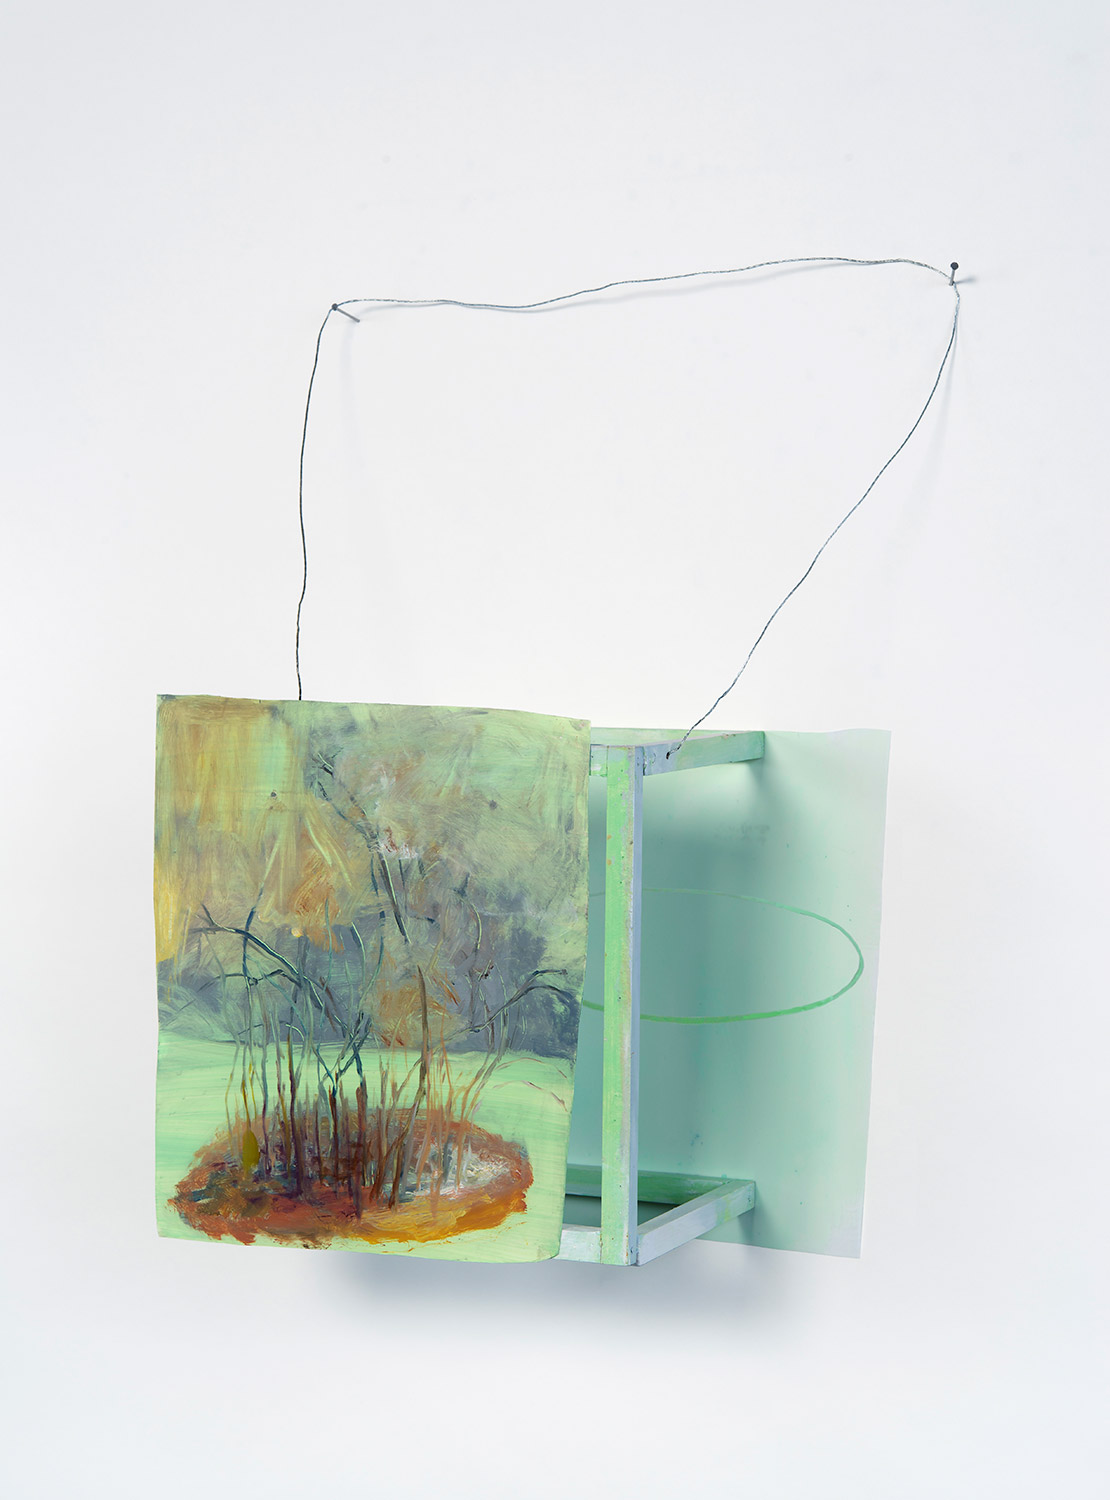   Possibly Now III   Oil on plastic and wood, wire 21 × 13 × 6.5 inches 53 × 33 × 16 cm 2013 &nbsp; 